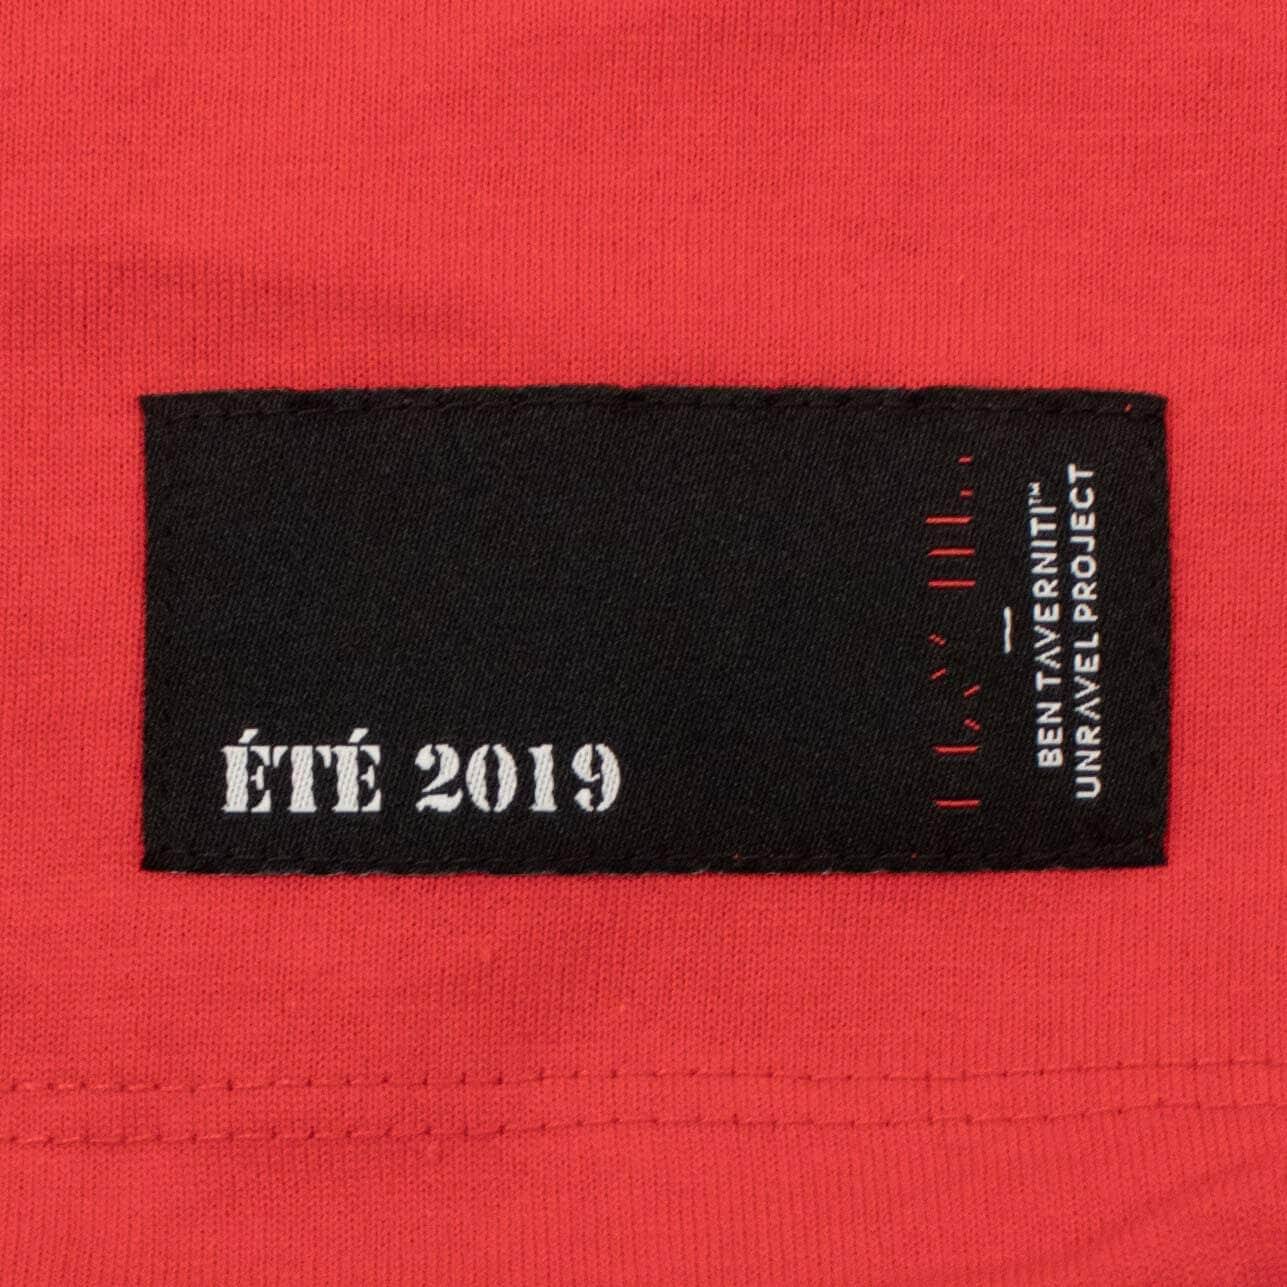 Unravel Project channelenable-all, chicmi, couponcollection, gender-mens, main-clothing S Red Drawstring T-Shirt 74NGG-UN-1004/S 74NGG-UN-1004/S